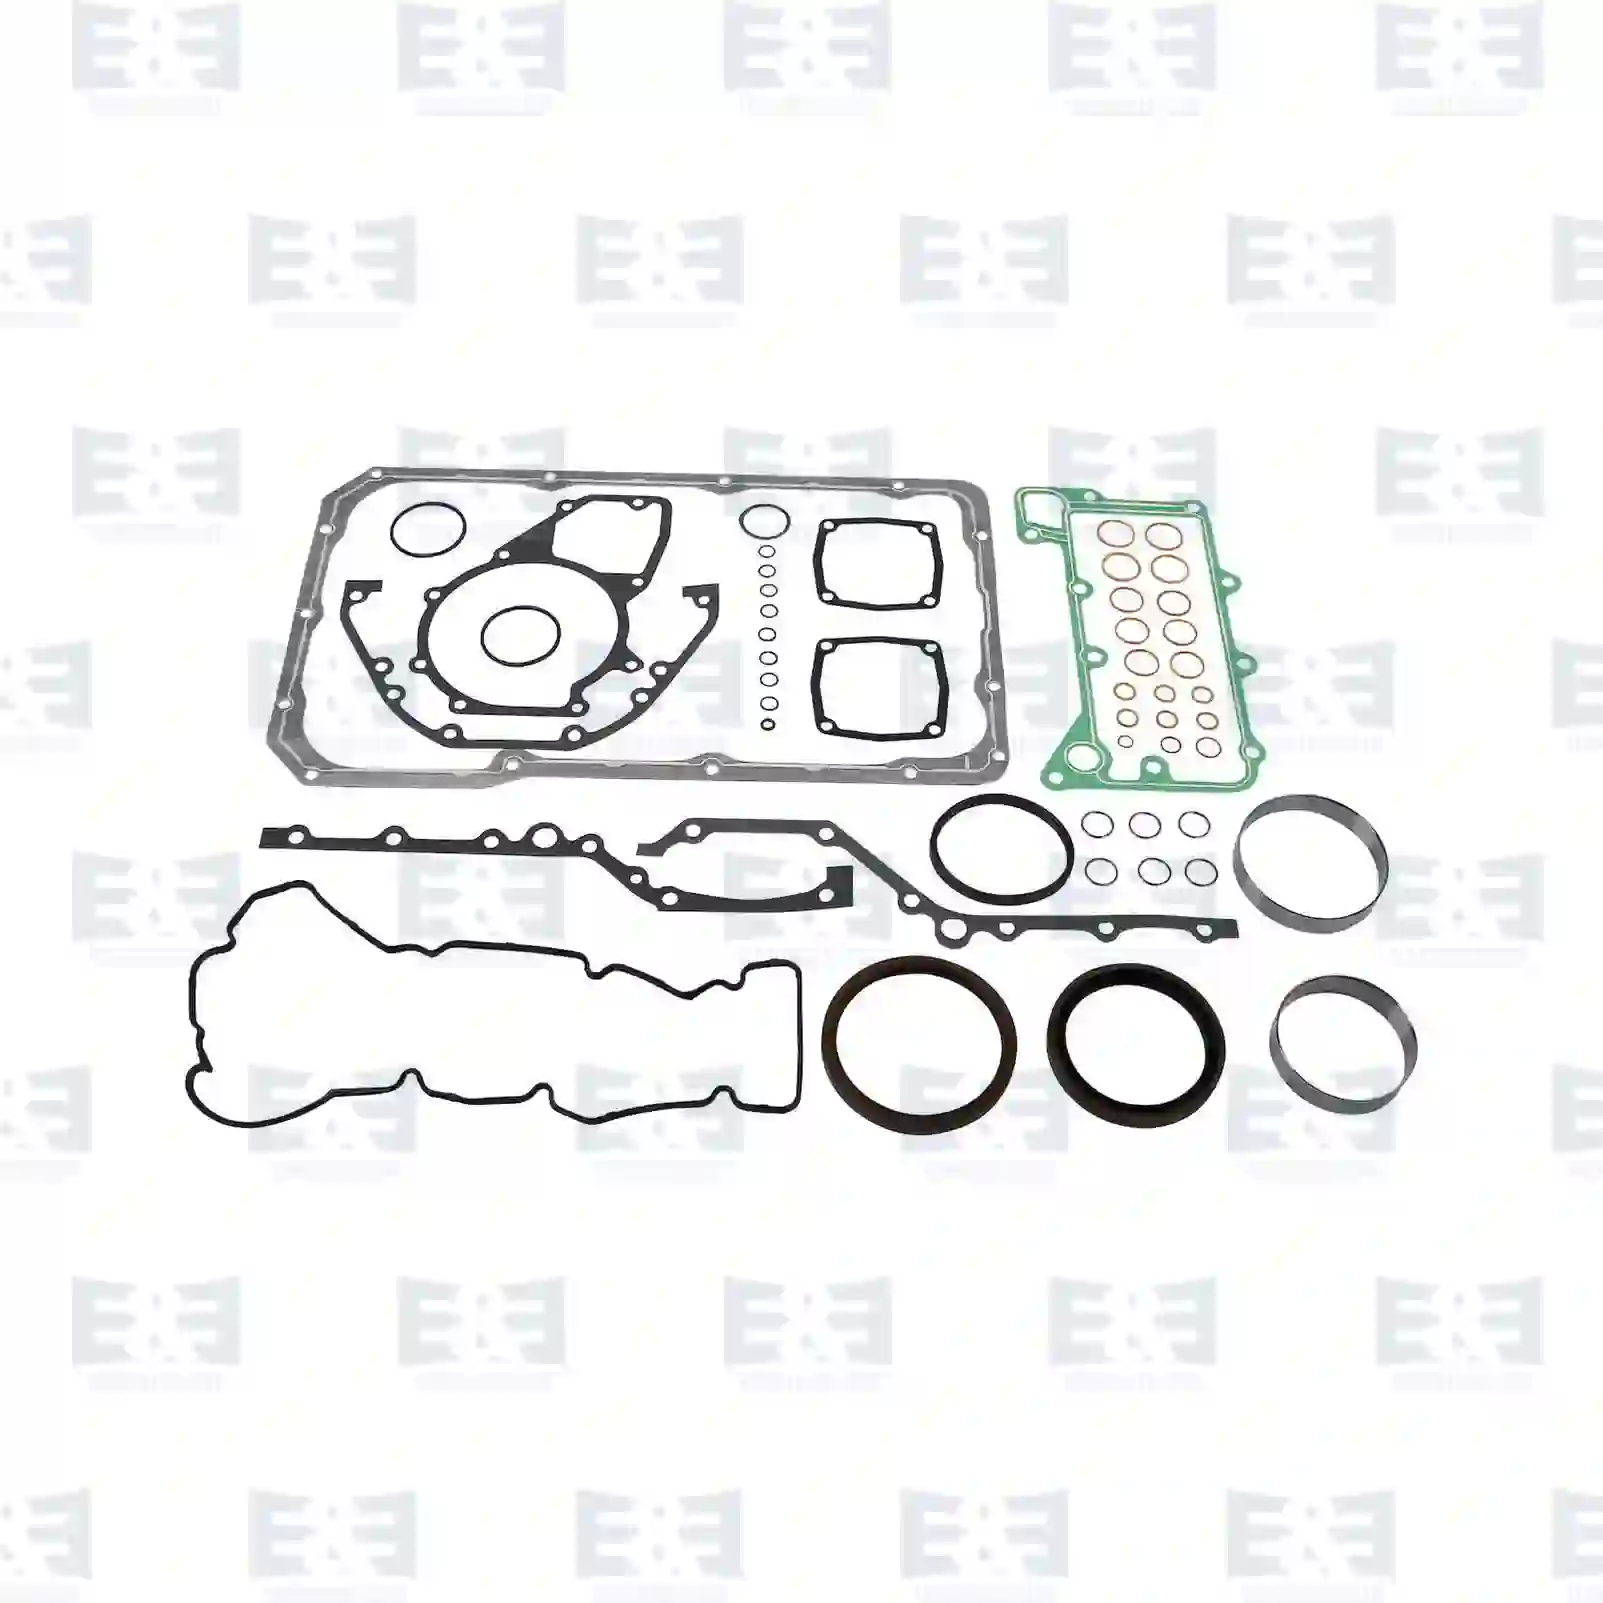 General overhaul kit, complete with race rings, 2E2209630, 4210100408 ||  2E2209630 E&E Truck Spare Parts | Truck Spare Parts, Auotomotive Spare Parts General overhaul kit, complete with race rings, 2E2209630, 4210100408 ||  2E2209630 E&E Truck Spare Parts | Truck Spare Parts, Auotomotive Spare Parts